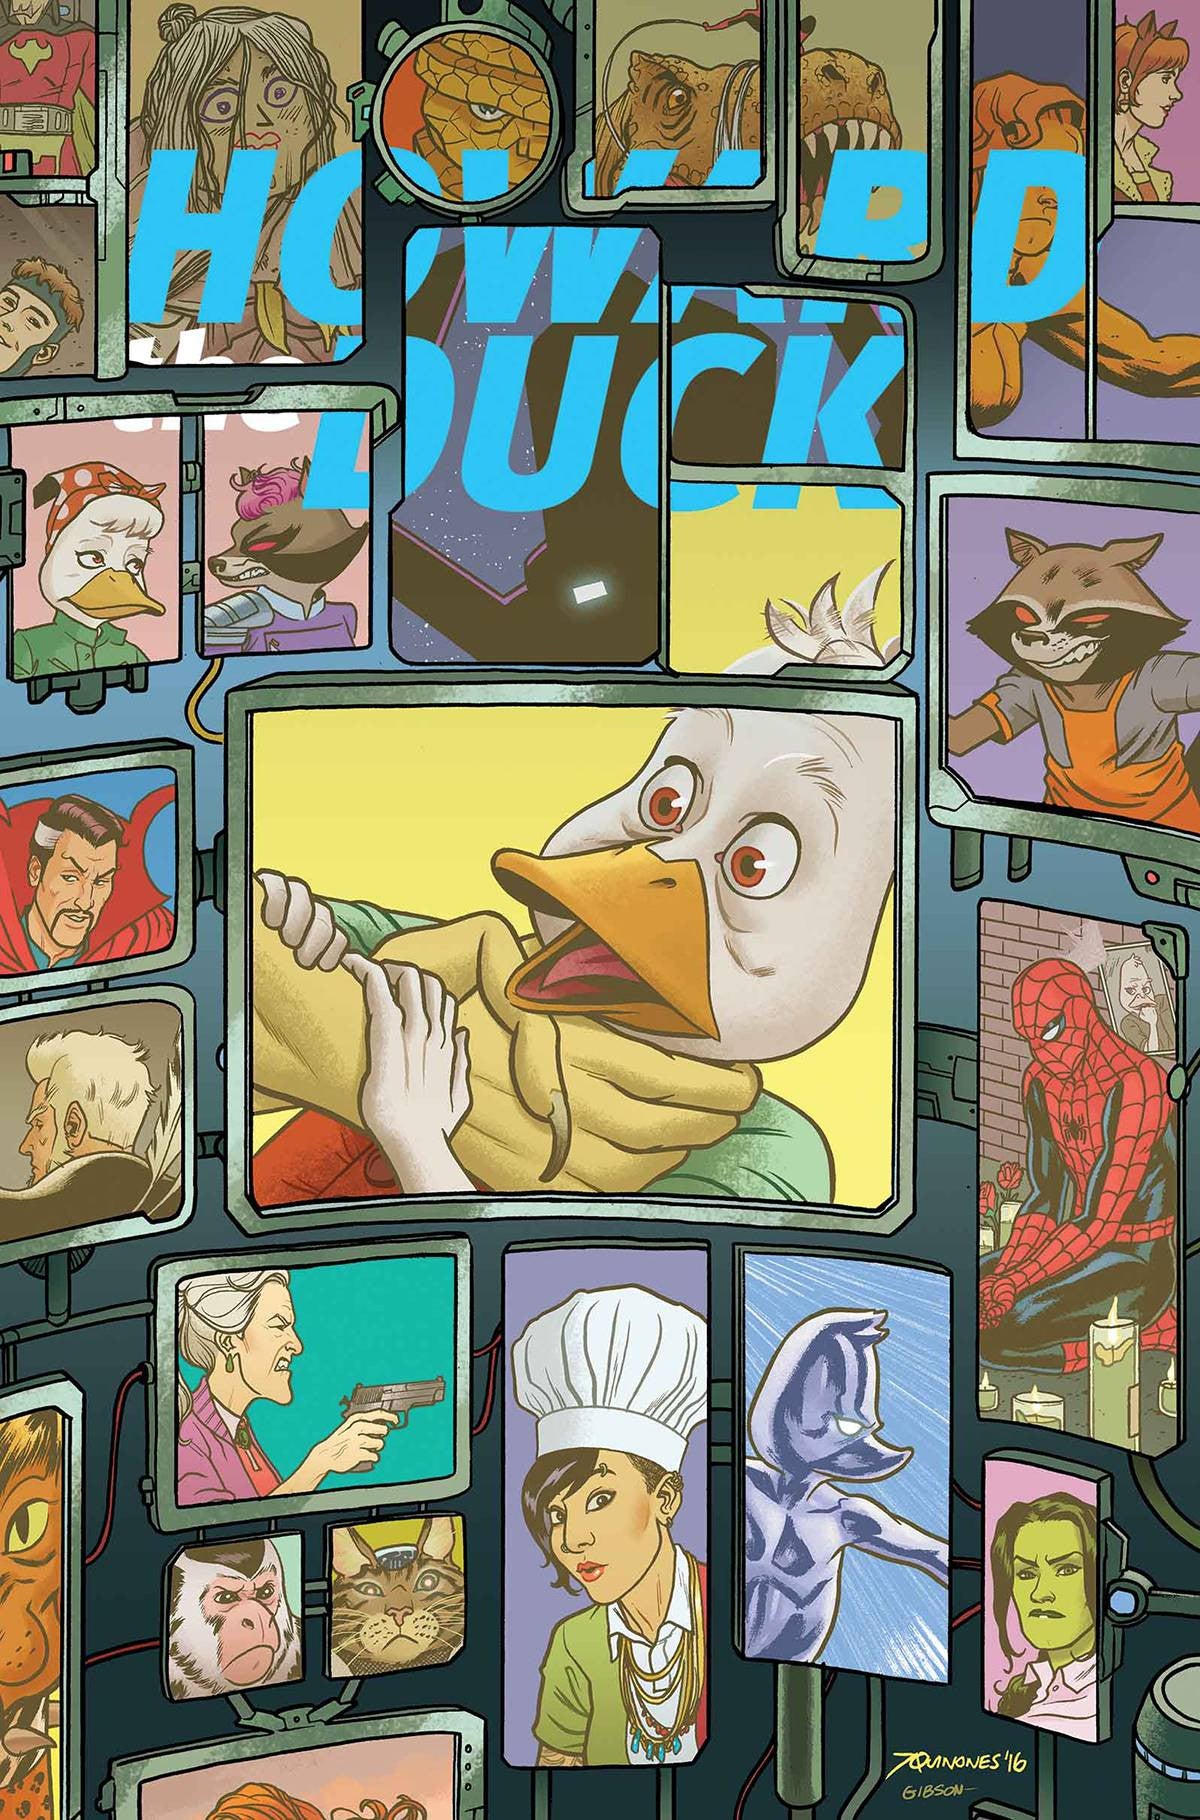 HOWARD THE DUCK #10 COVER